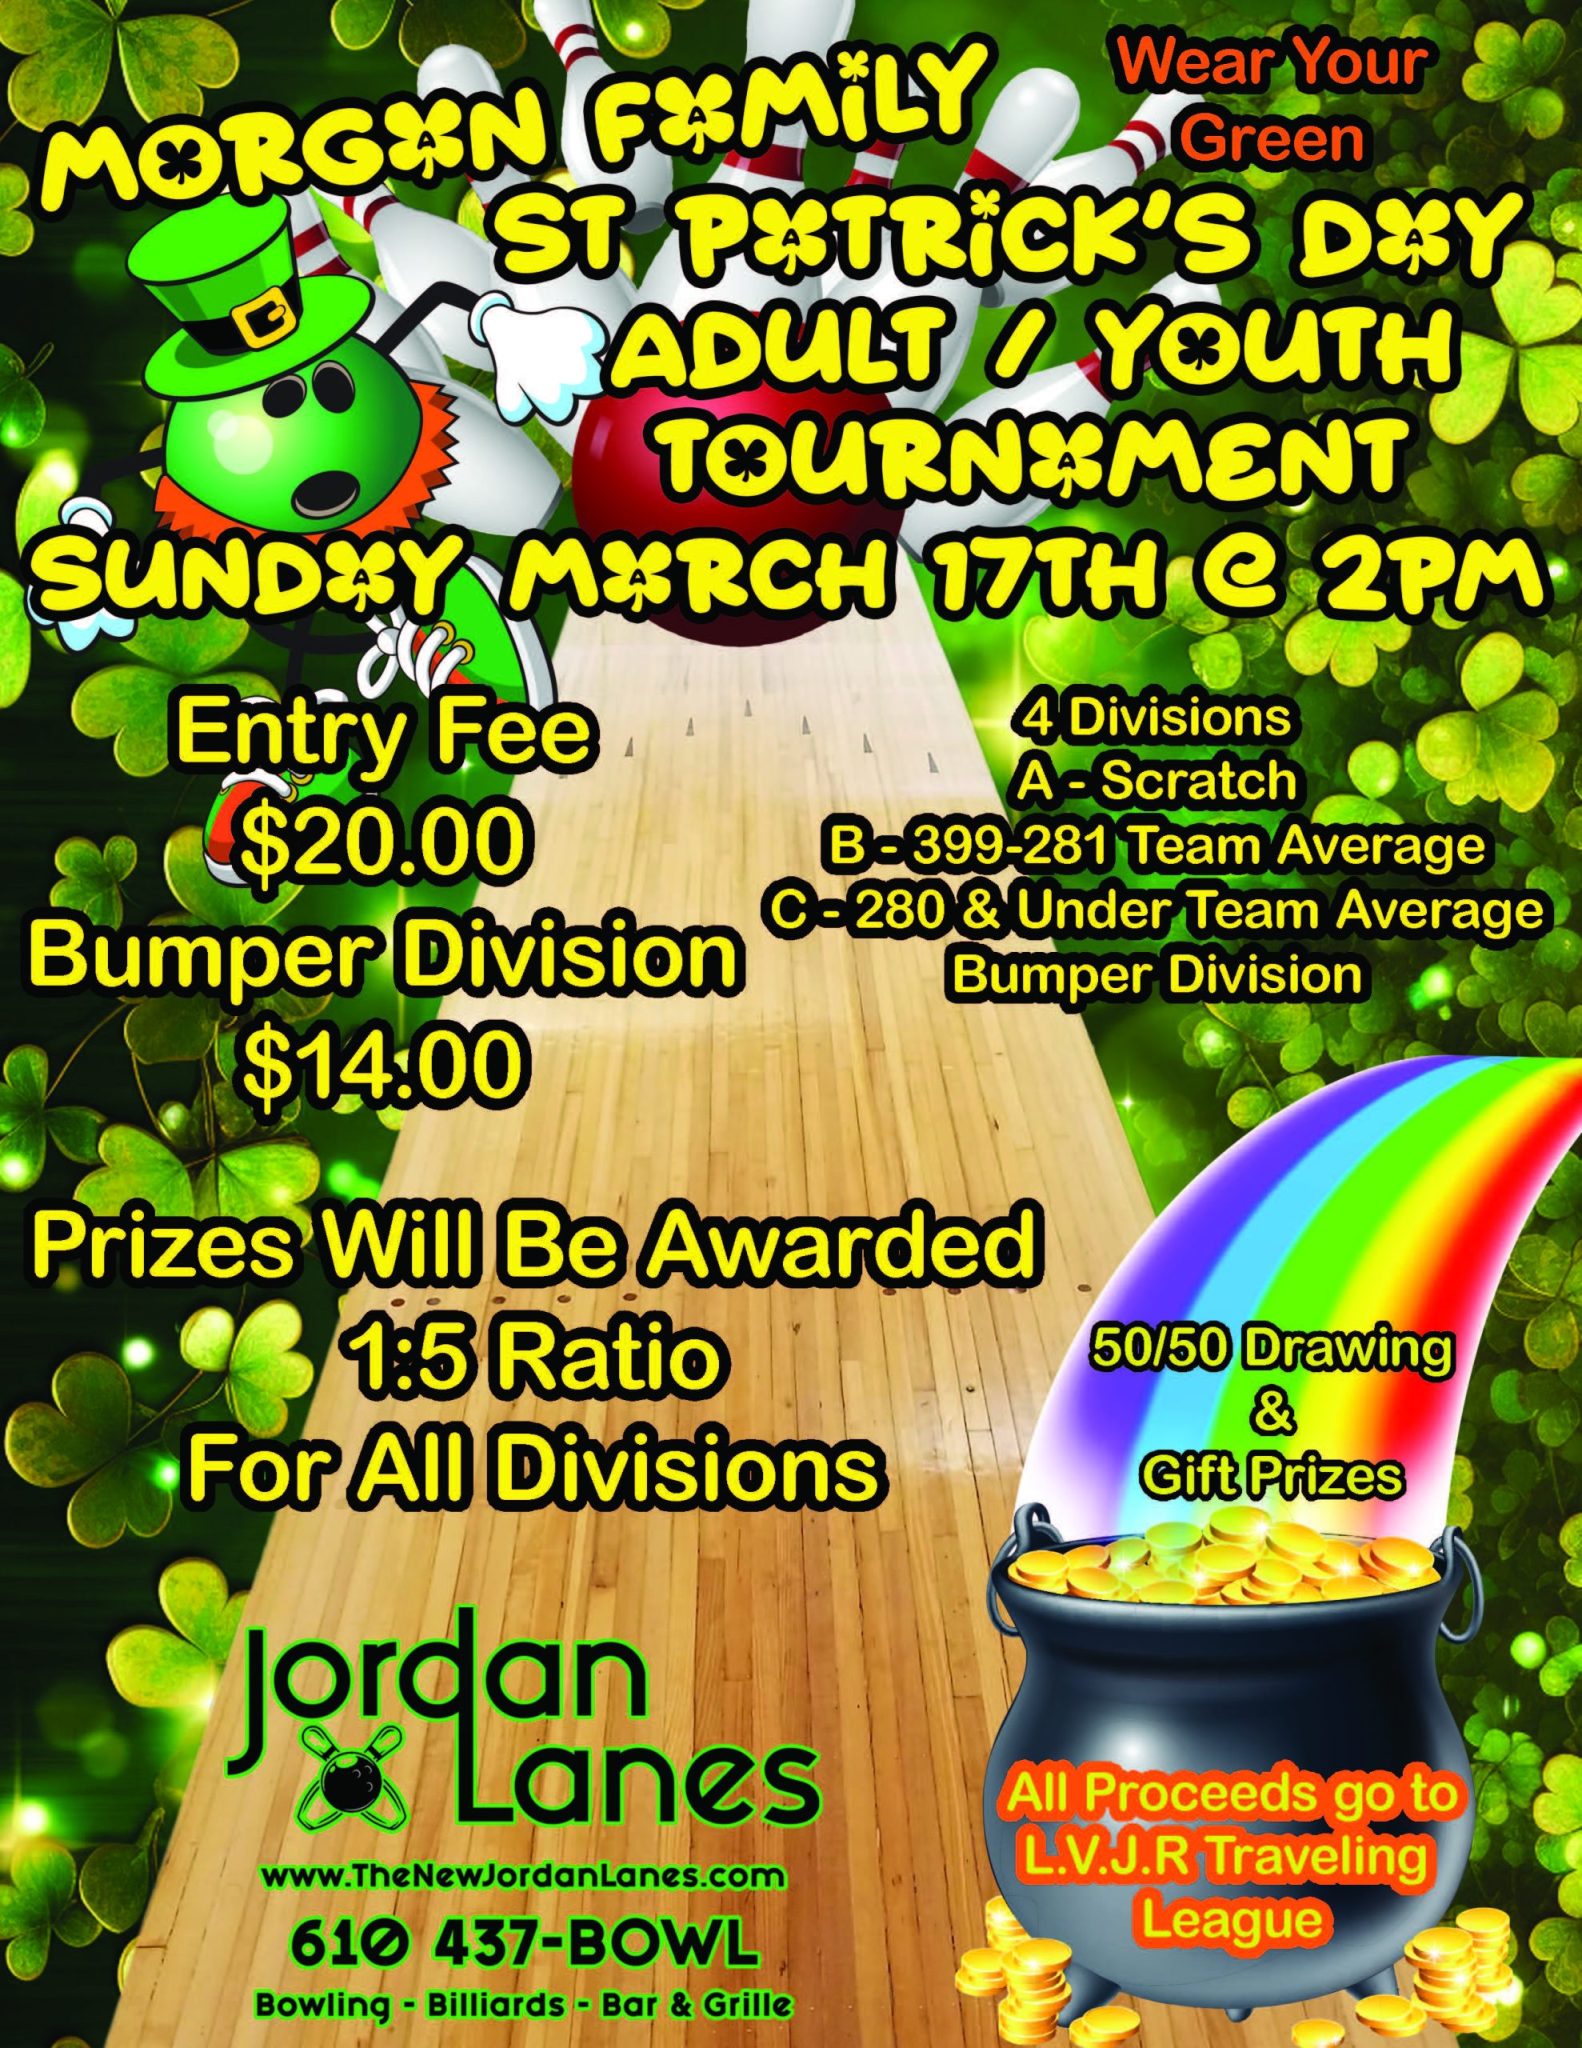 Morgan Family Adult / Youth Tournament 6